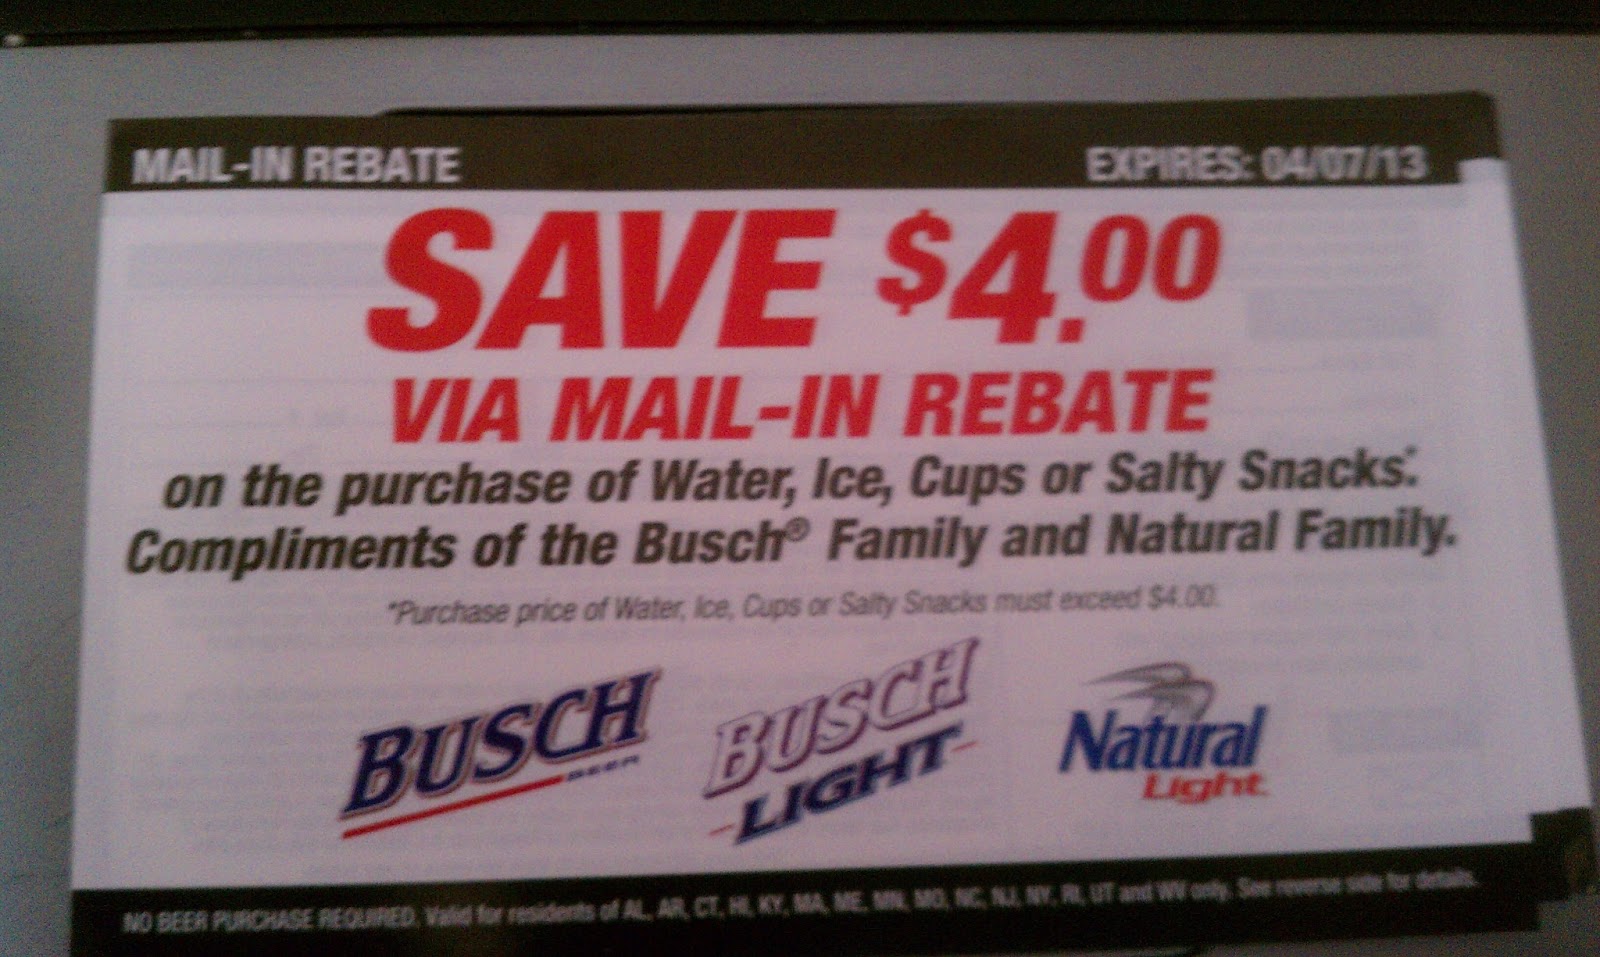 coupon-stl-busch-rebate-4-on-water-ice-cups-or-salty-snacks